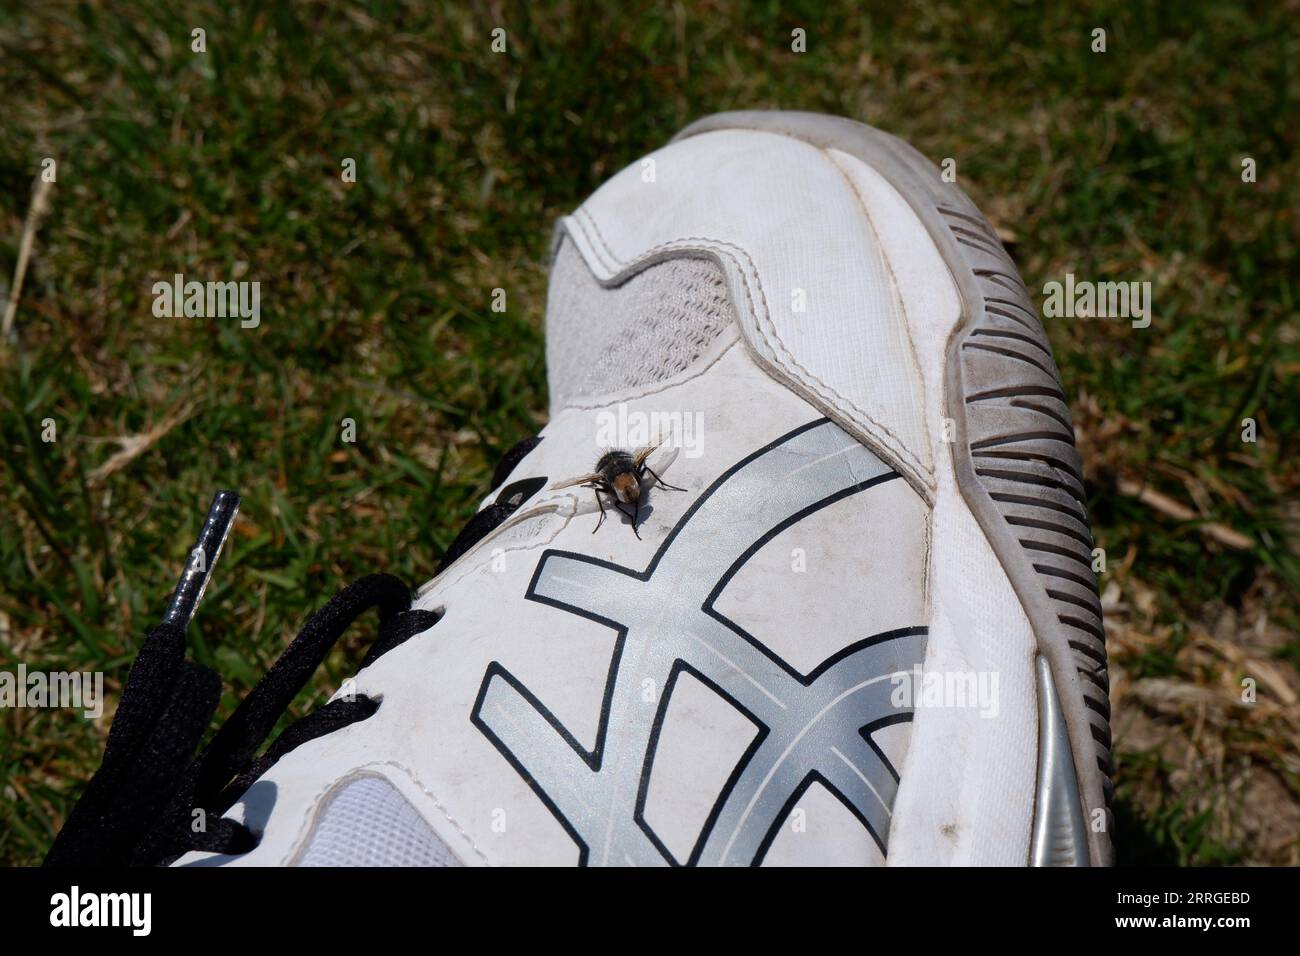 A docile little fly on my shoe. Stock Photo